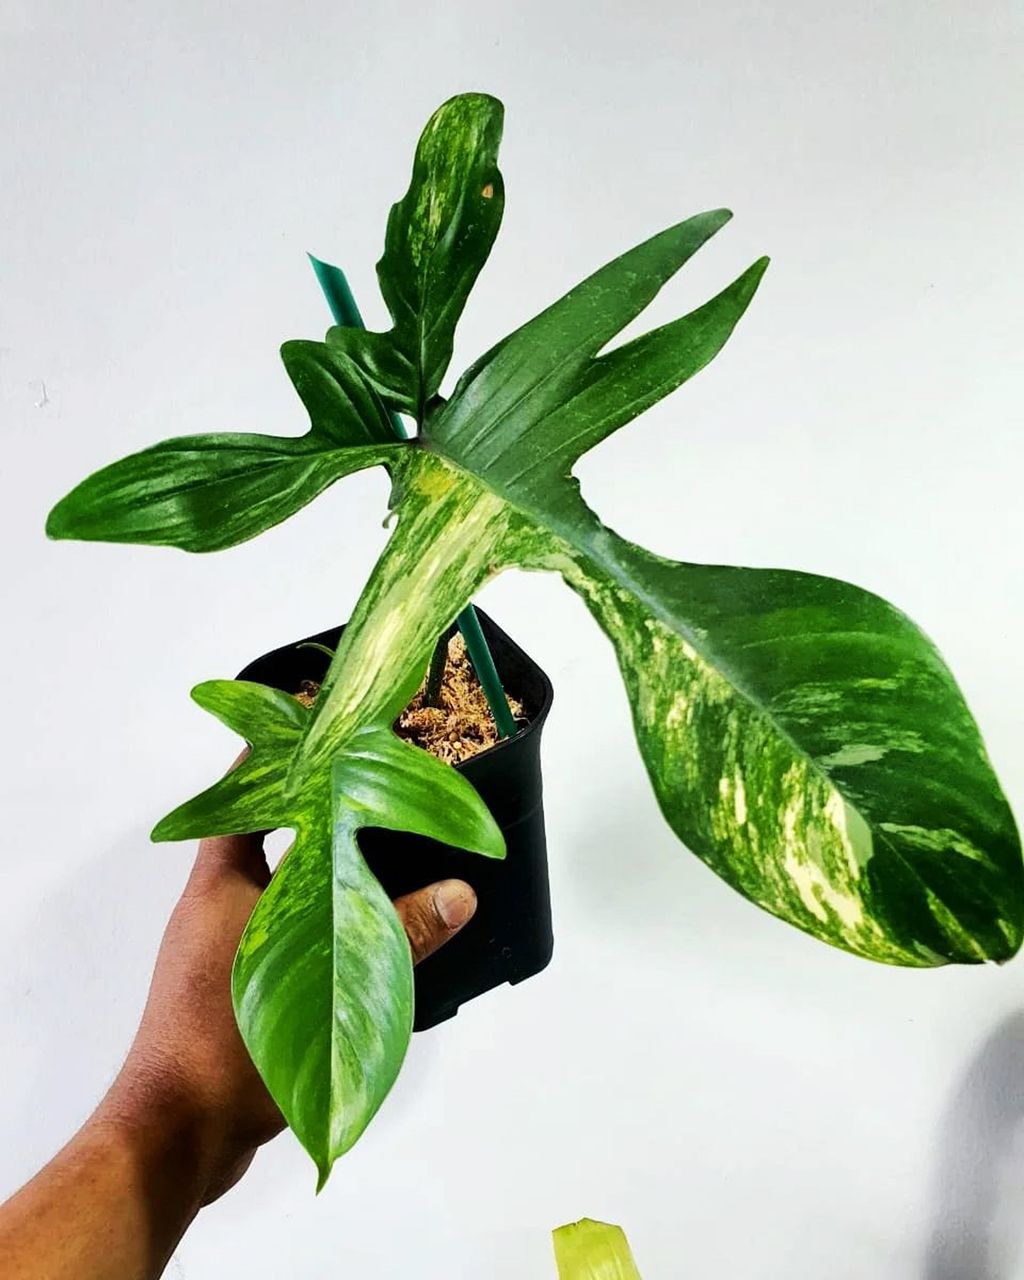 PHILODENDRON Florida Beauty Varigated House Plants FREE Phytosanitary Certificate and FREE Express Shipping HT